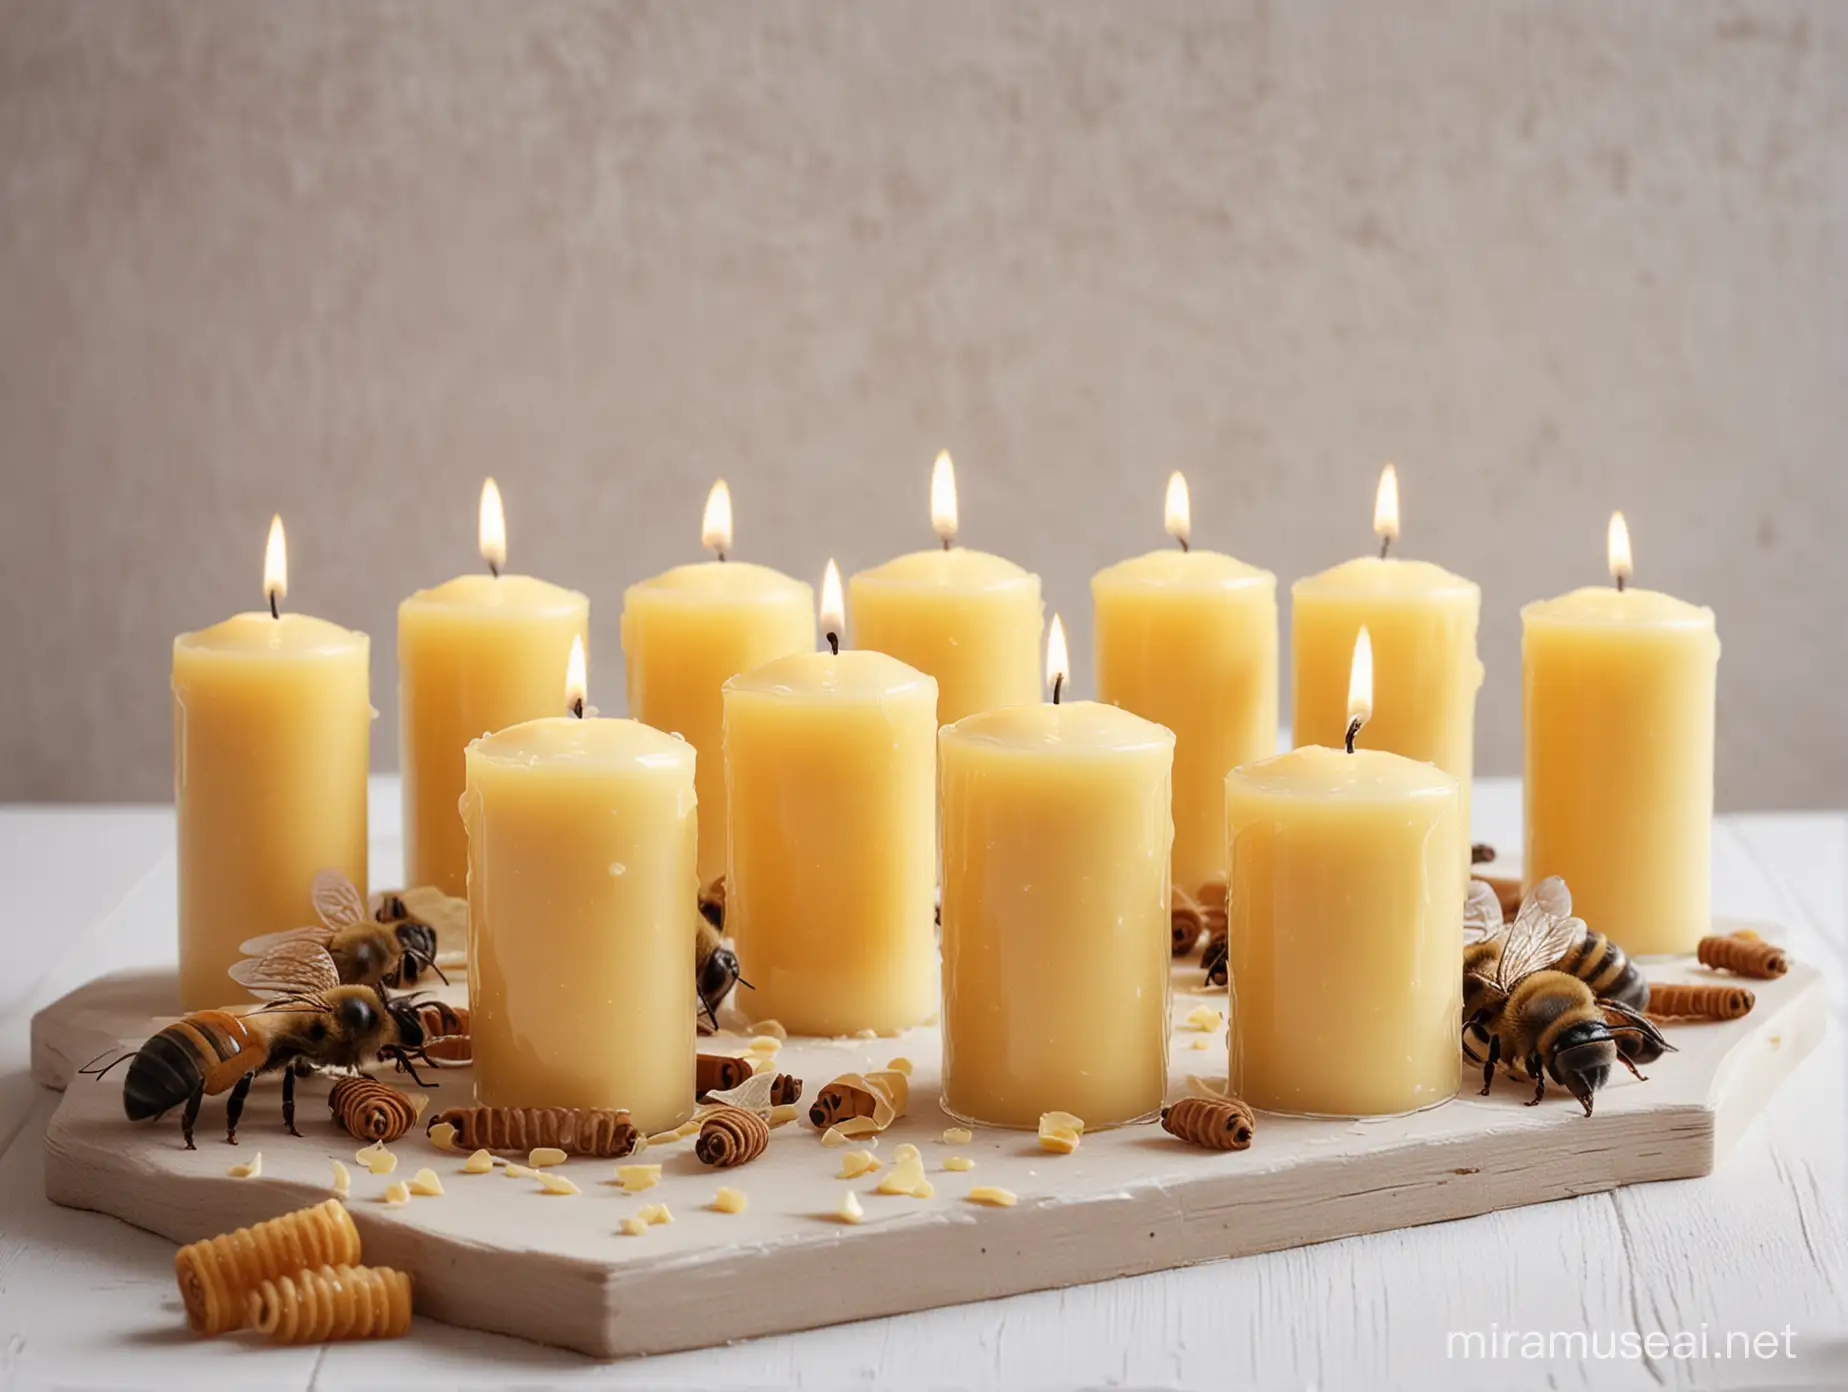 Elegant Bee Wax Candles Arranged on a White Table